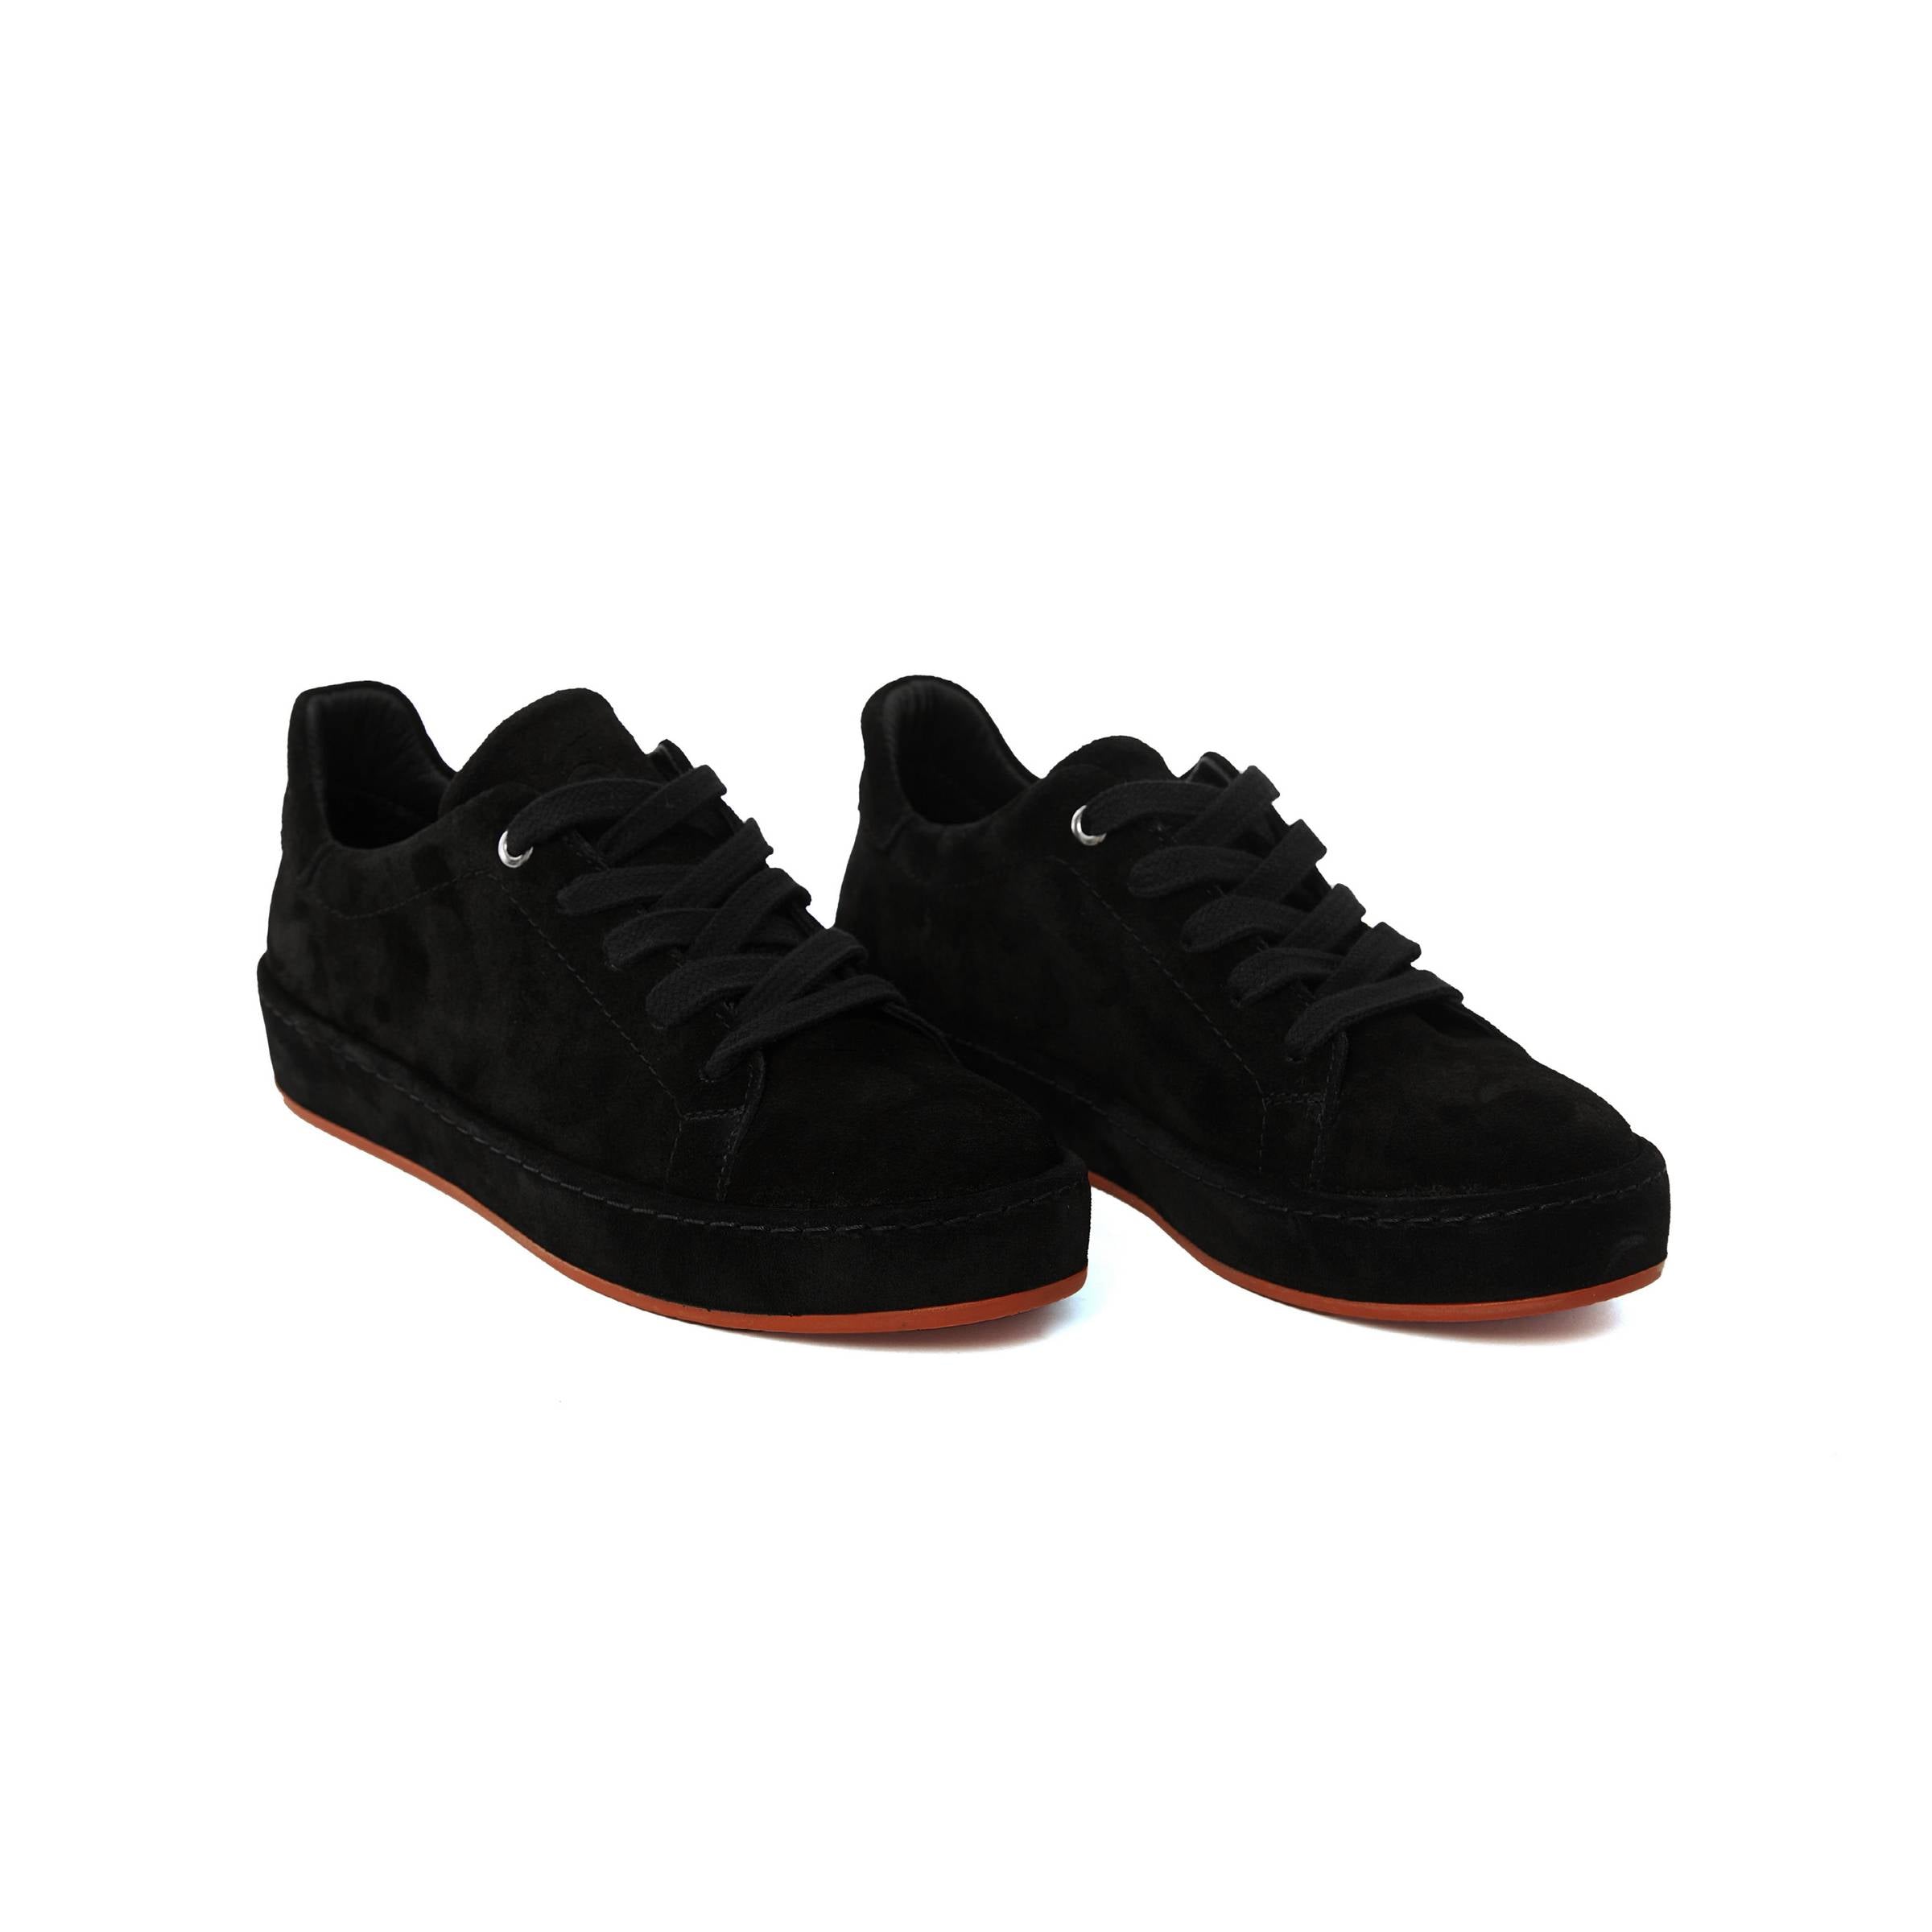 Women's Suede Calf Leather Handmade Sneakers W5007